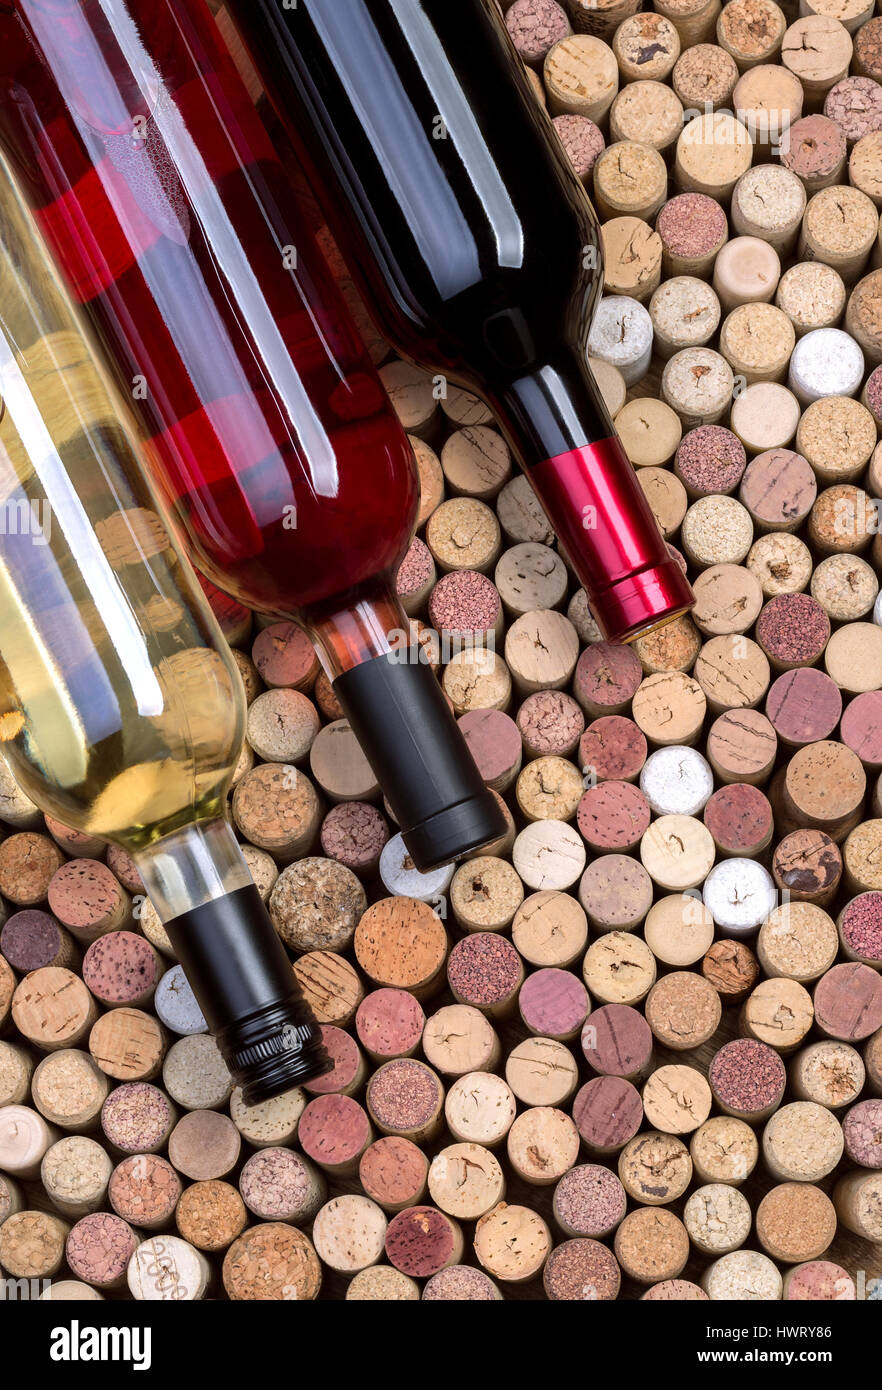 wine bottles and corks background close up Stock Photo